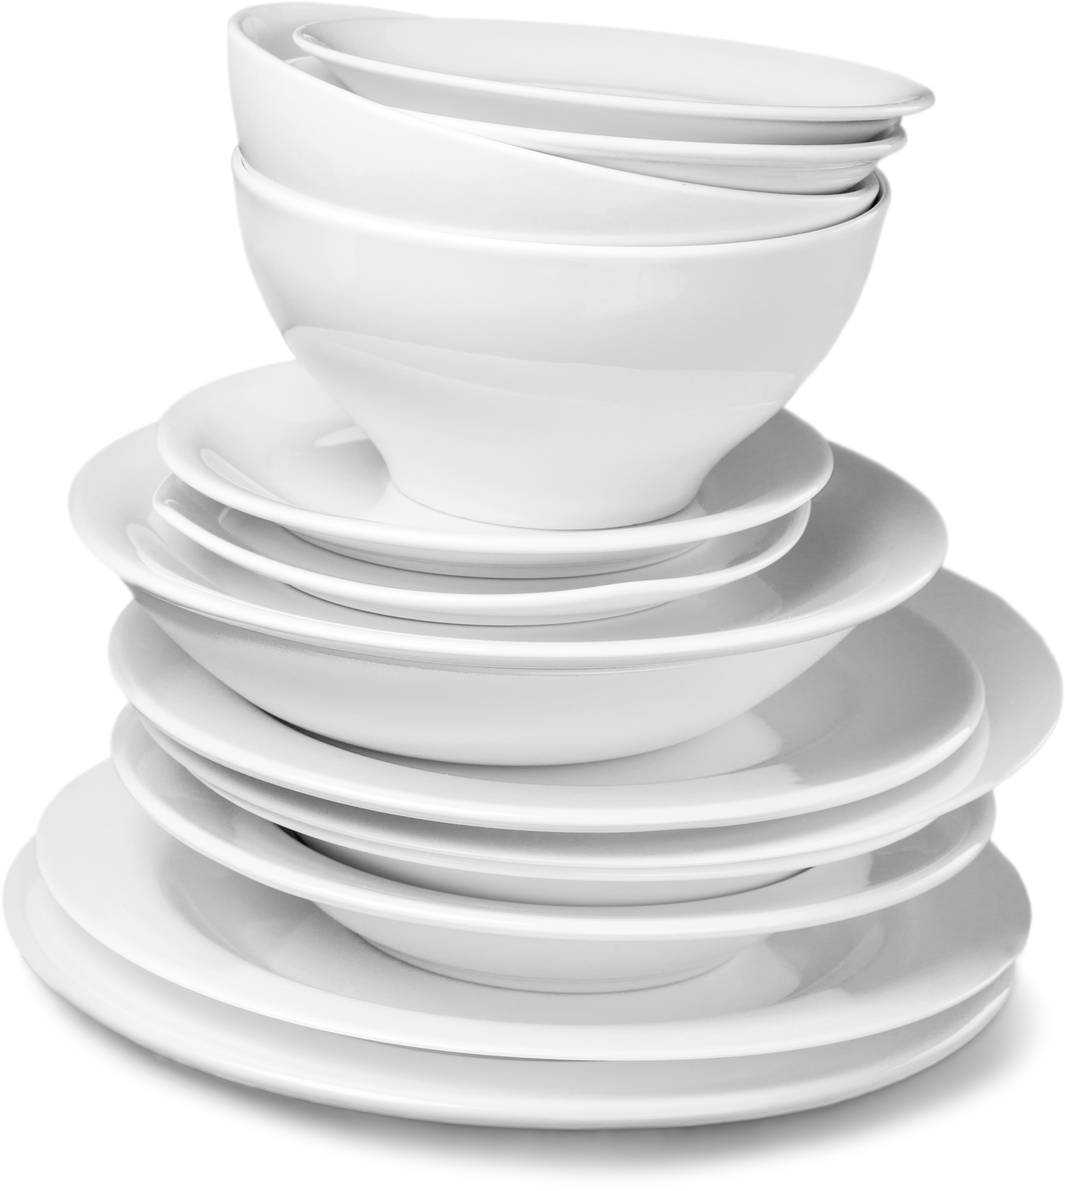 Stack of Dishes and Bowls